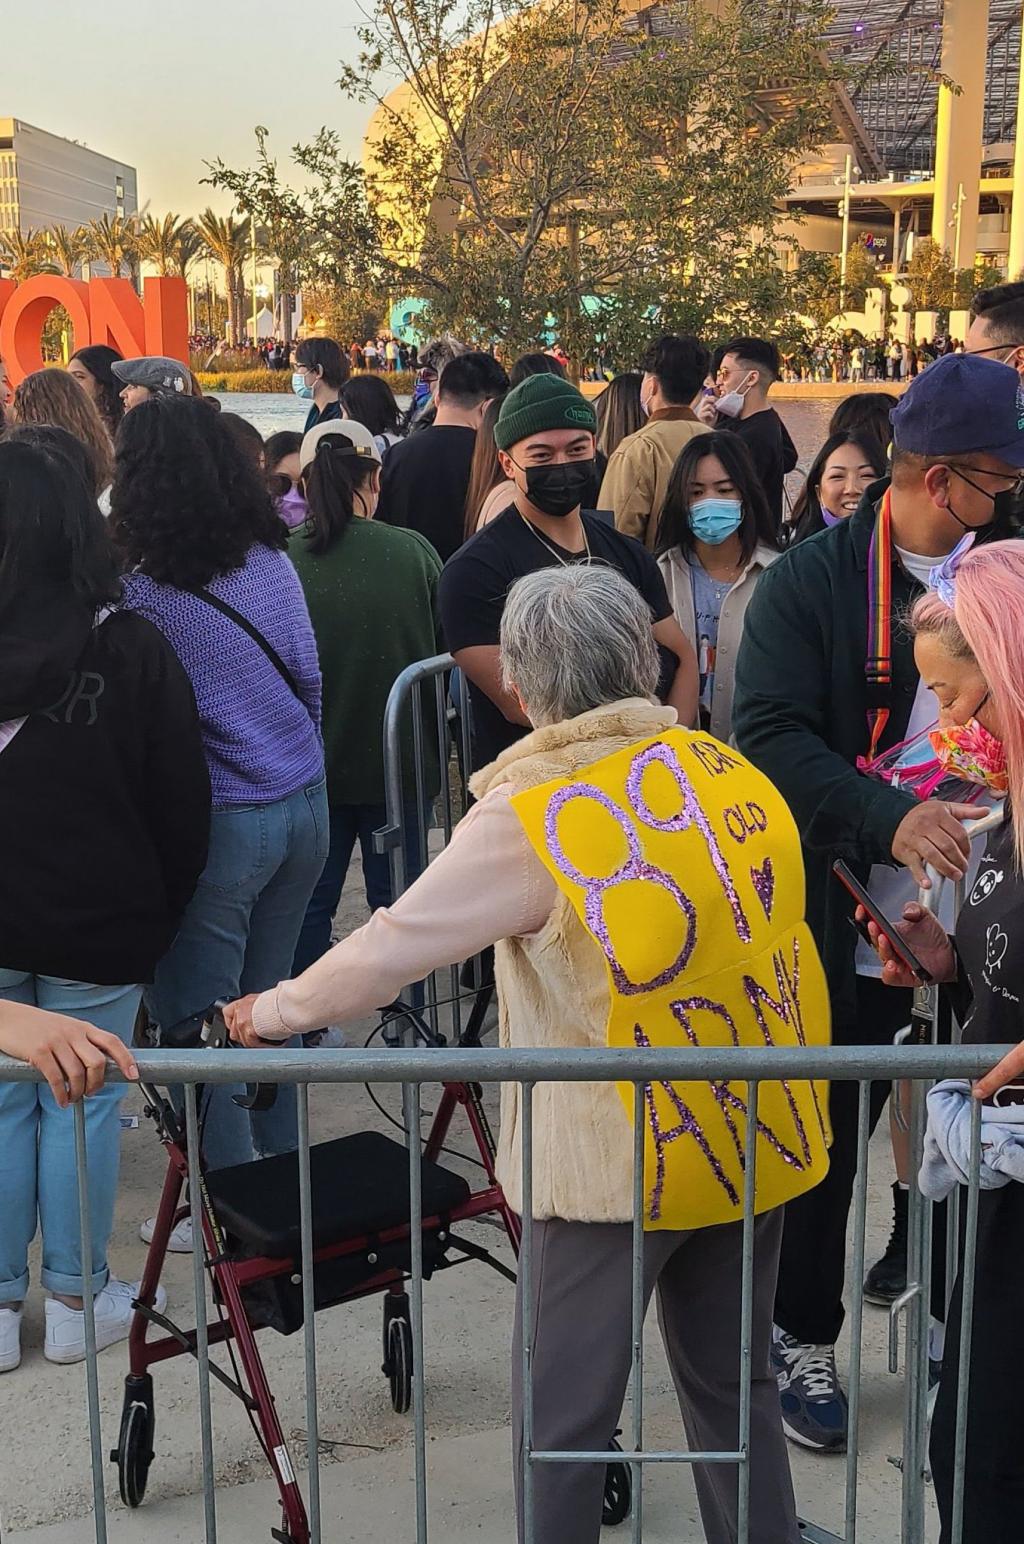 89-year-old ARMY who attended the BTS concert.